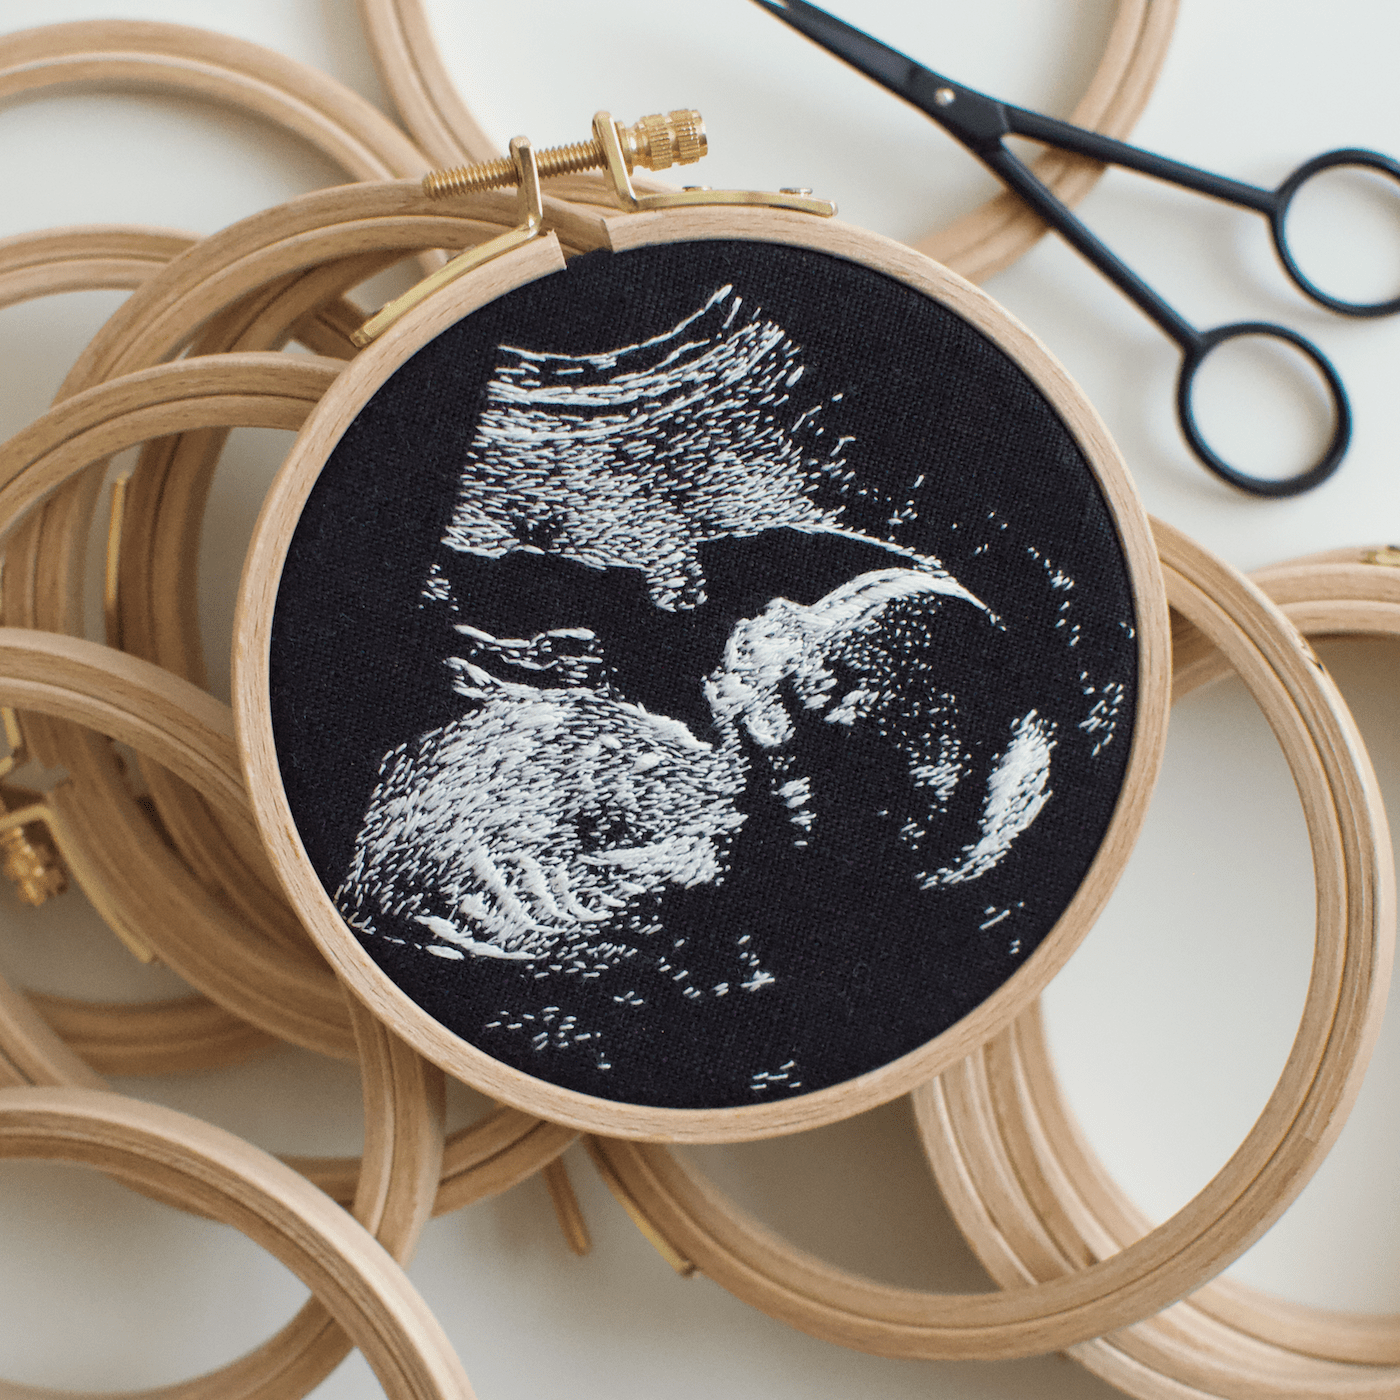 Embroidered sonogram imagery in a hoop.